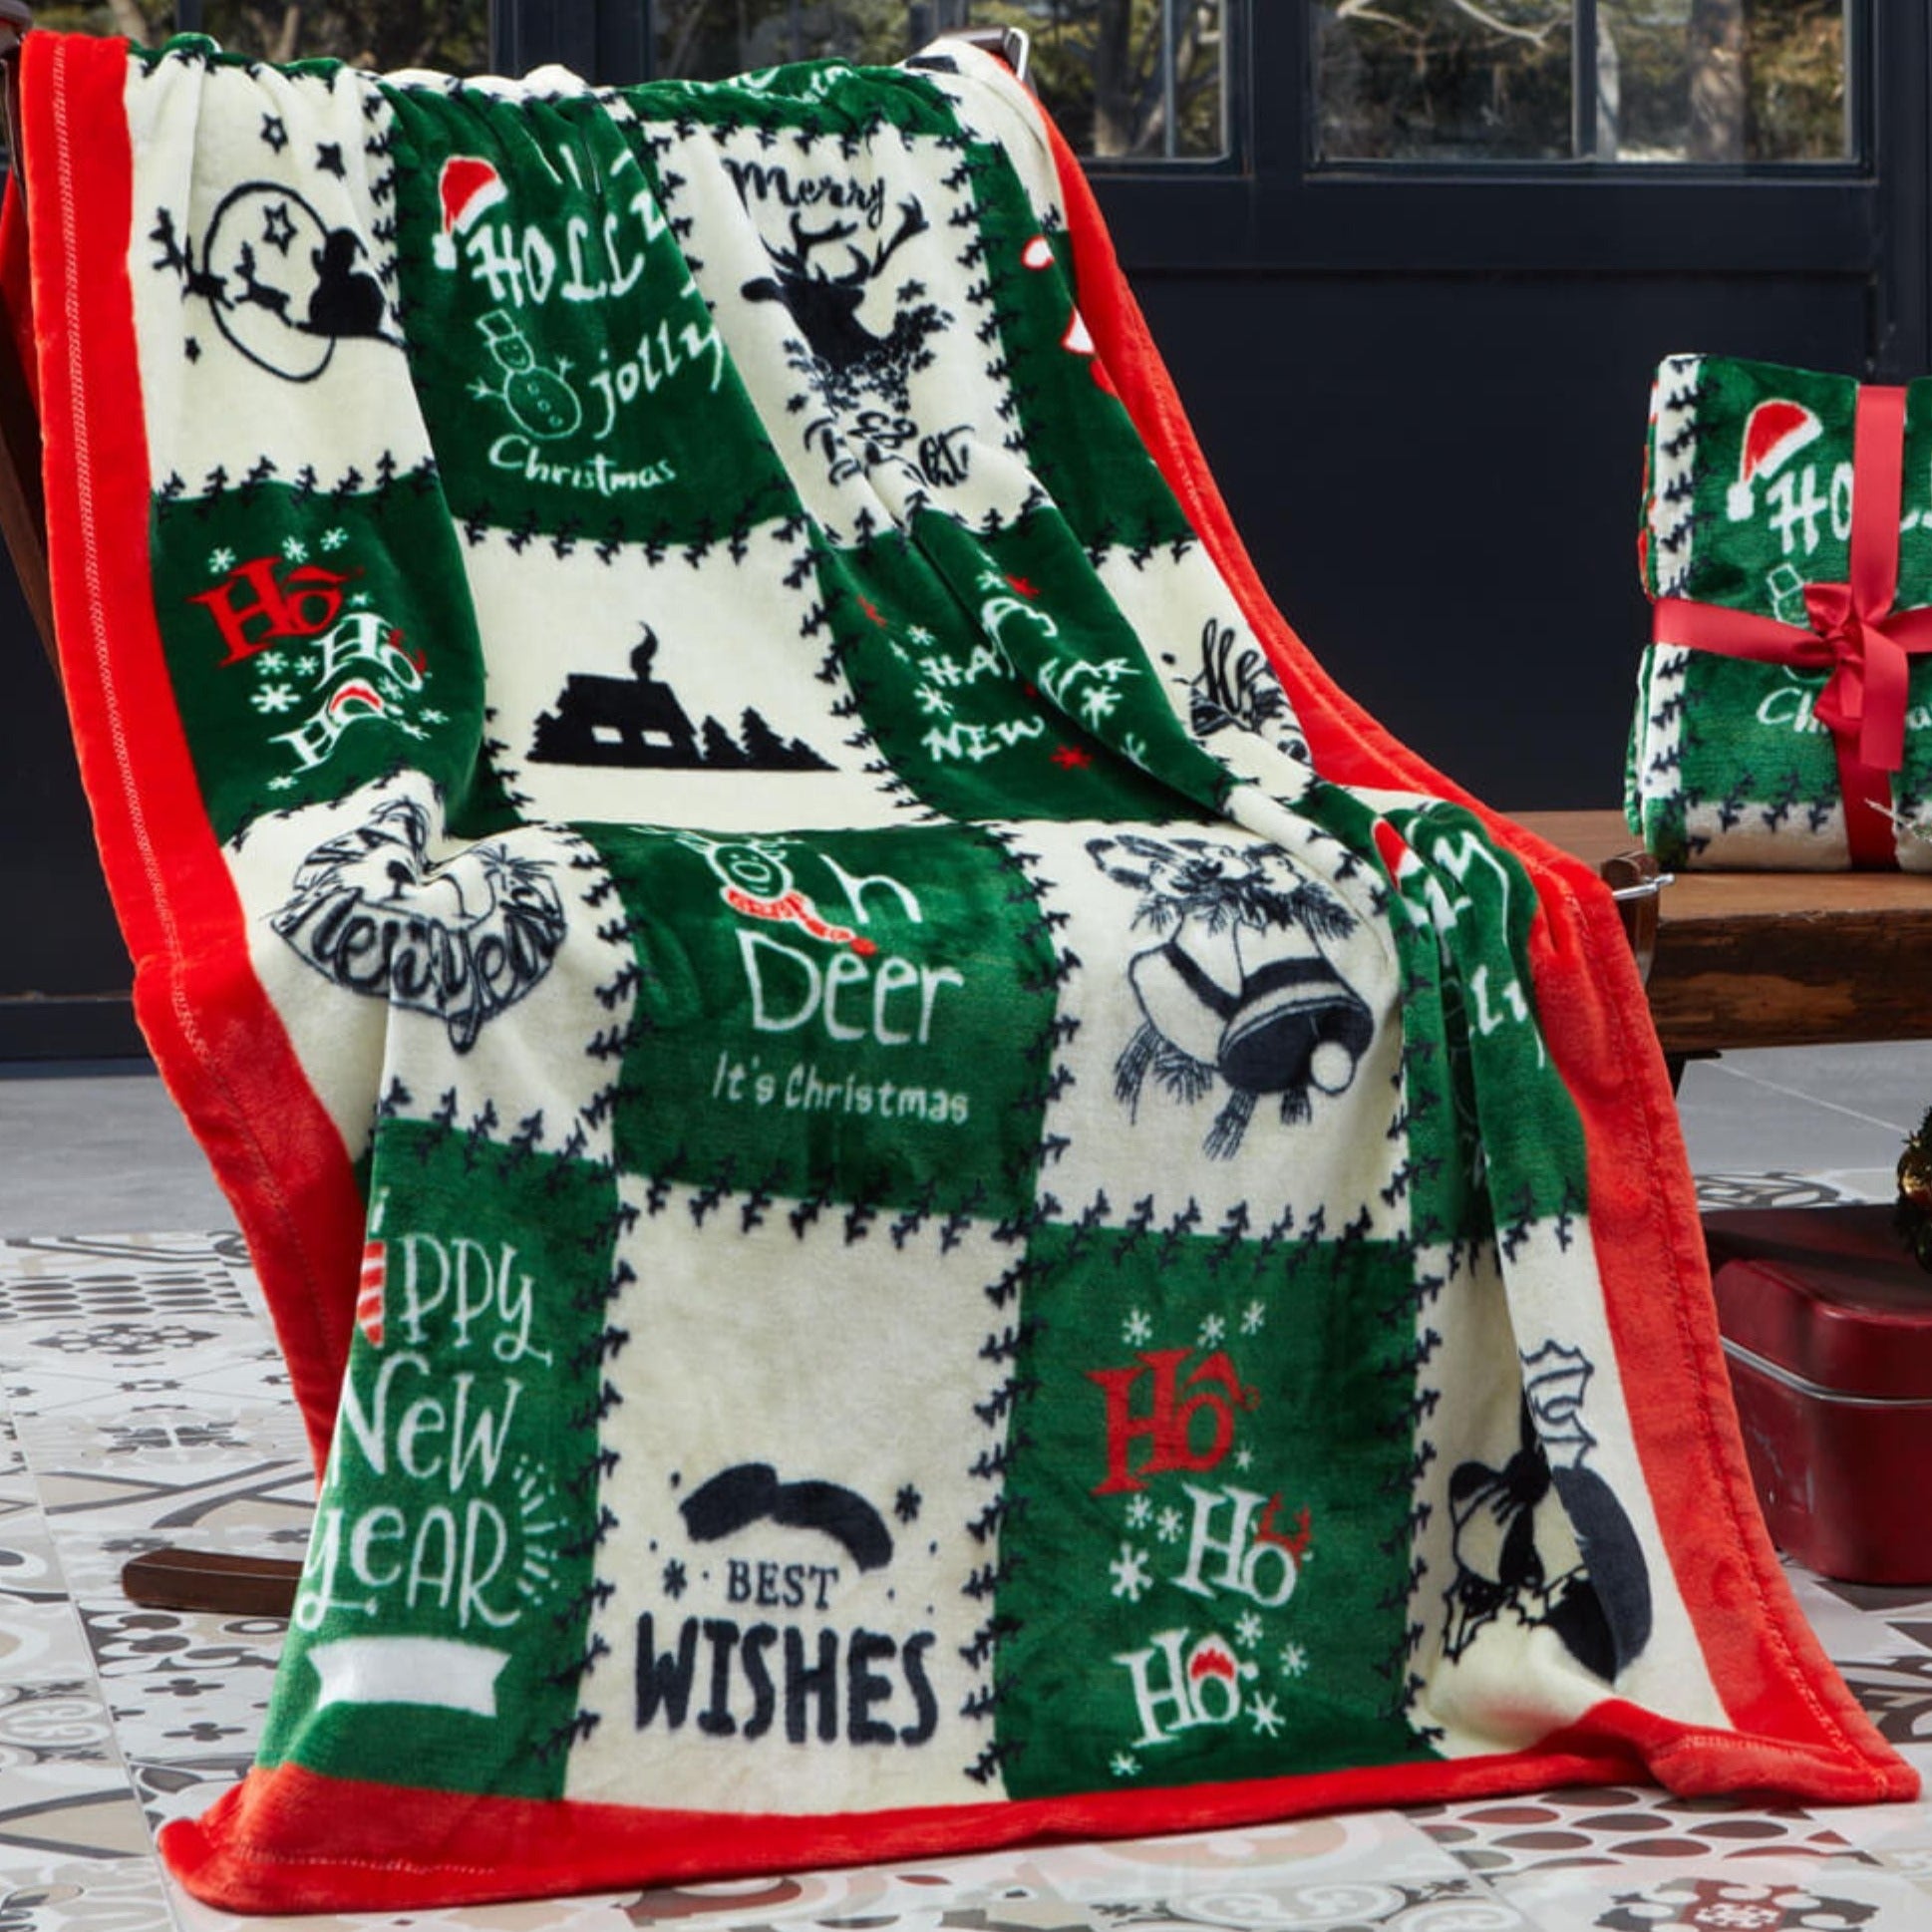 A green Christmas blanket with a deer design is on the couch.